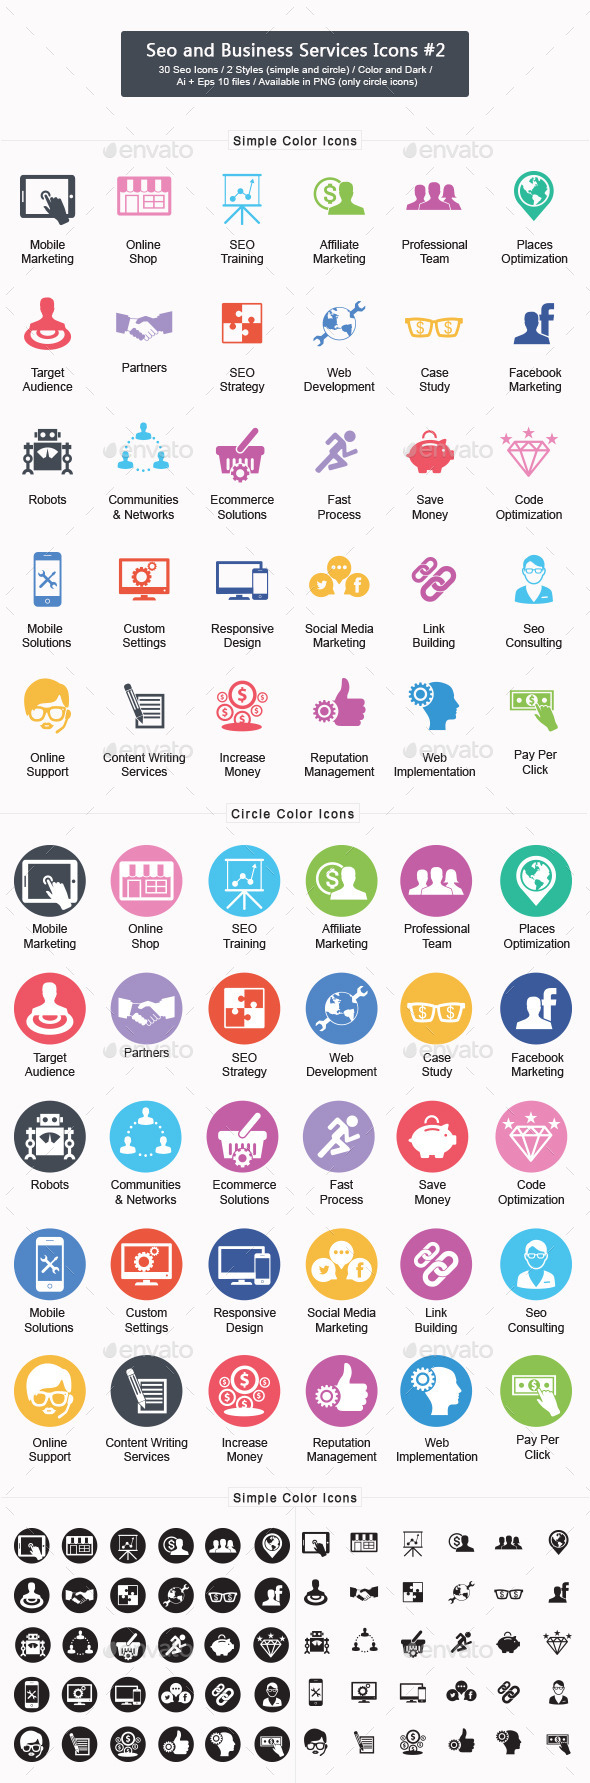 Seo and Business Services Icons Set 2